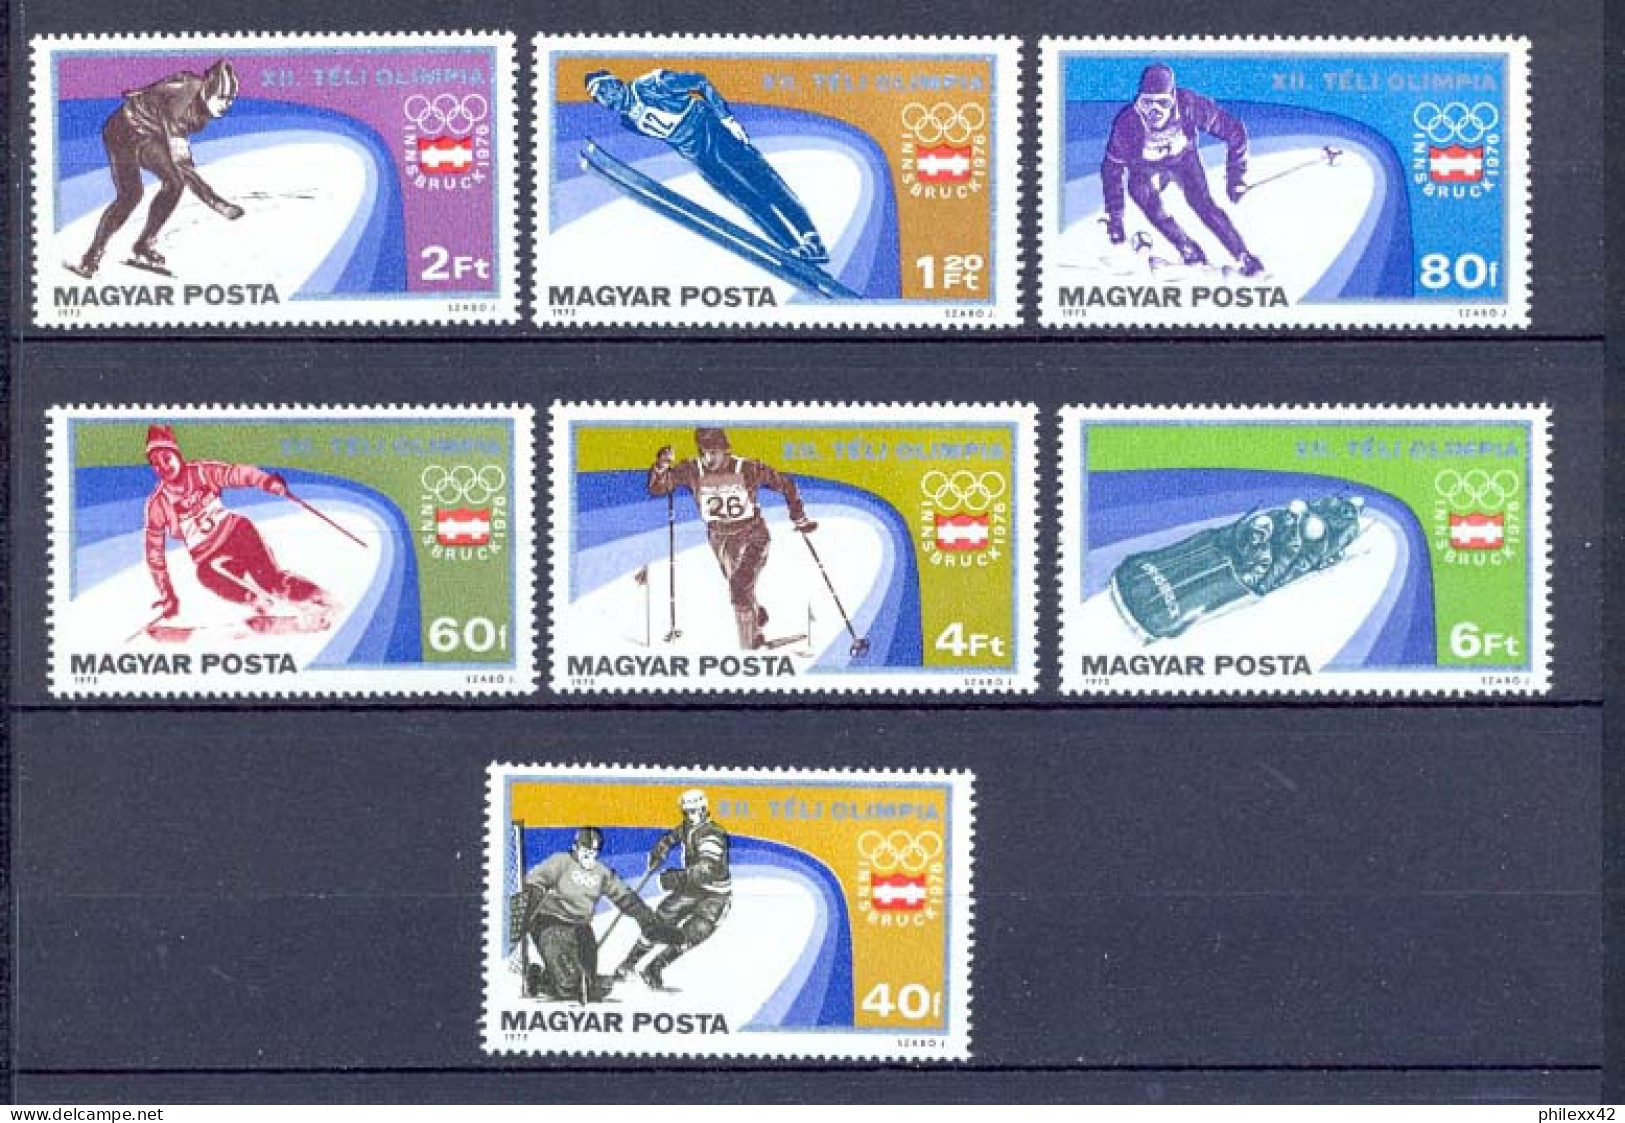 024 Hongrie (Hungary) MNH ** N° 2472 / 2478 Jeux Olympiques (olympic Games) Innsbruck 76 - Inverno1976: Innsbruck